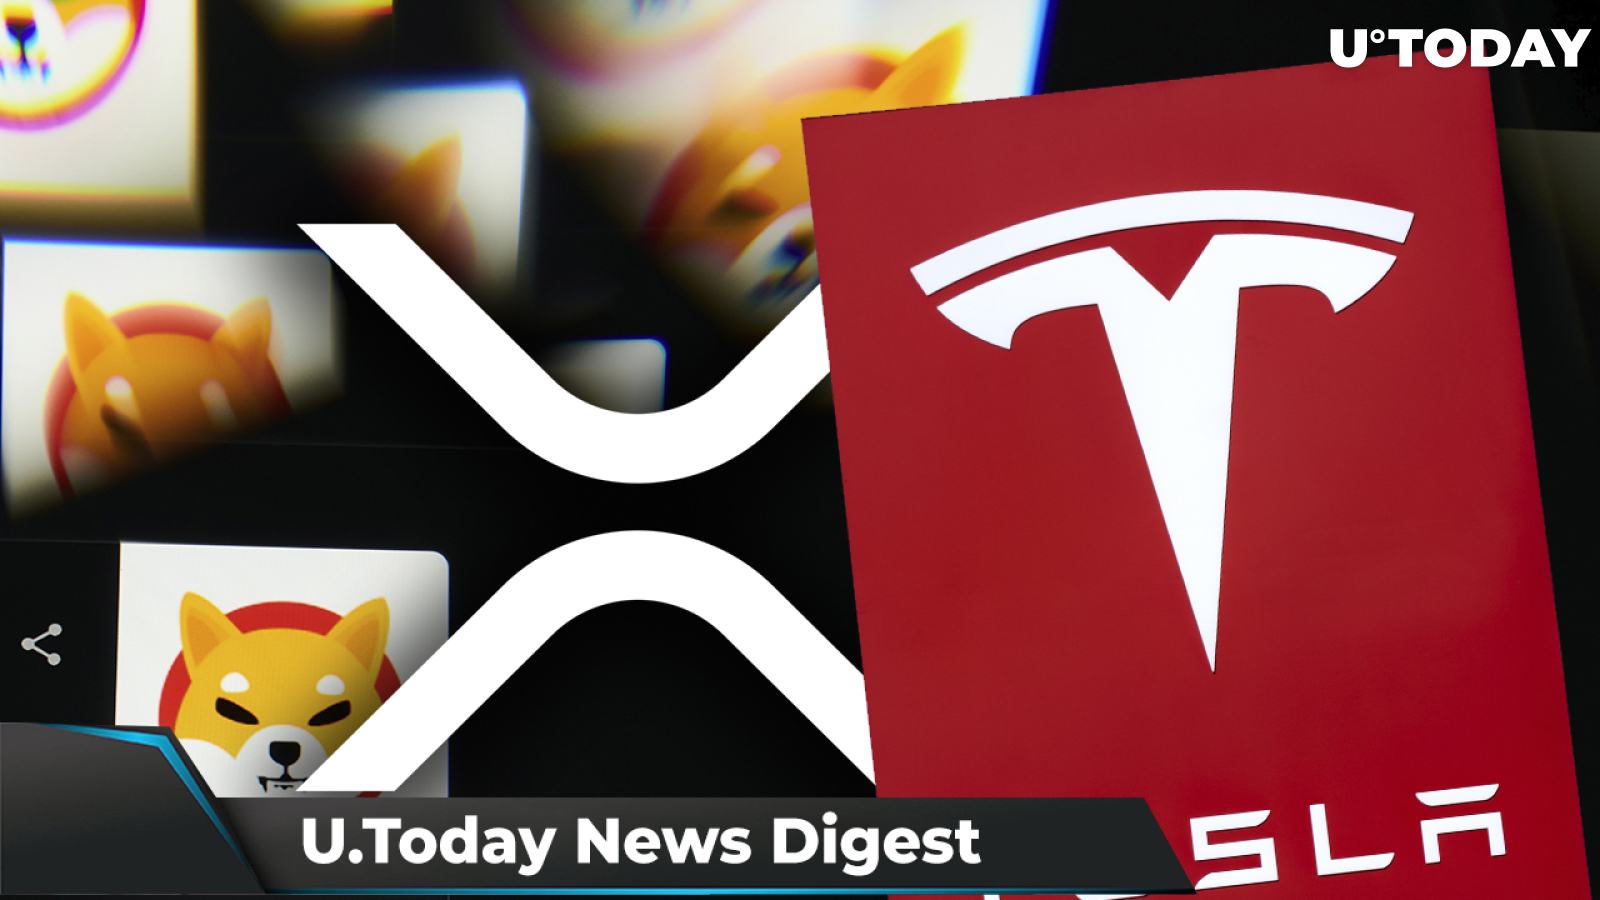 SHIB Price Surges 25%, Tesla Reports Holding $2 Billion Worth of BTC, XRP Outperforms Top 10 Cryptos: Crypto News Digest by U.Today